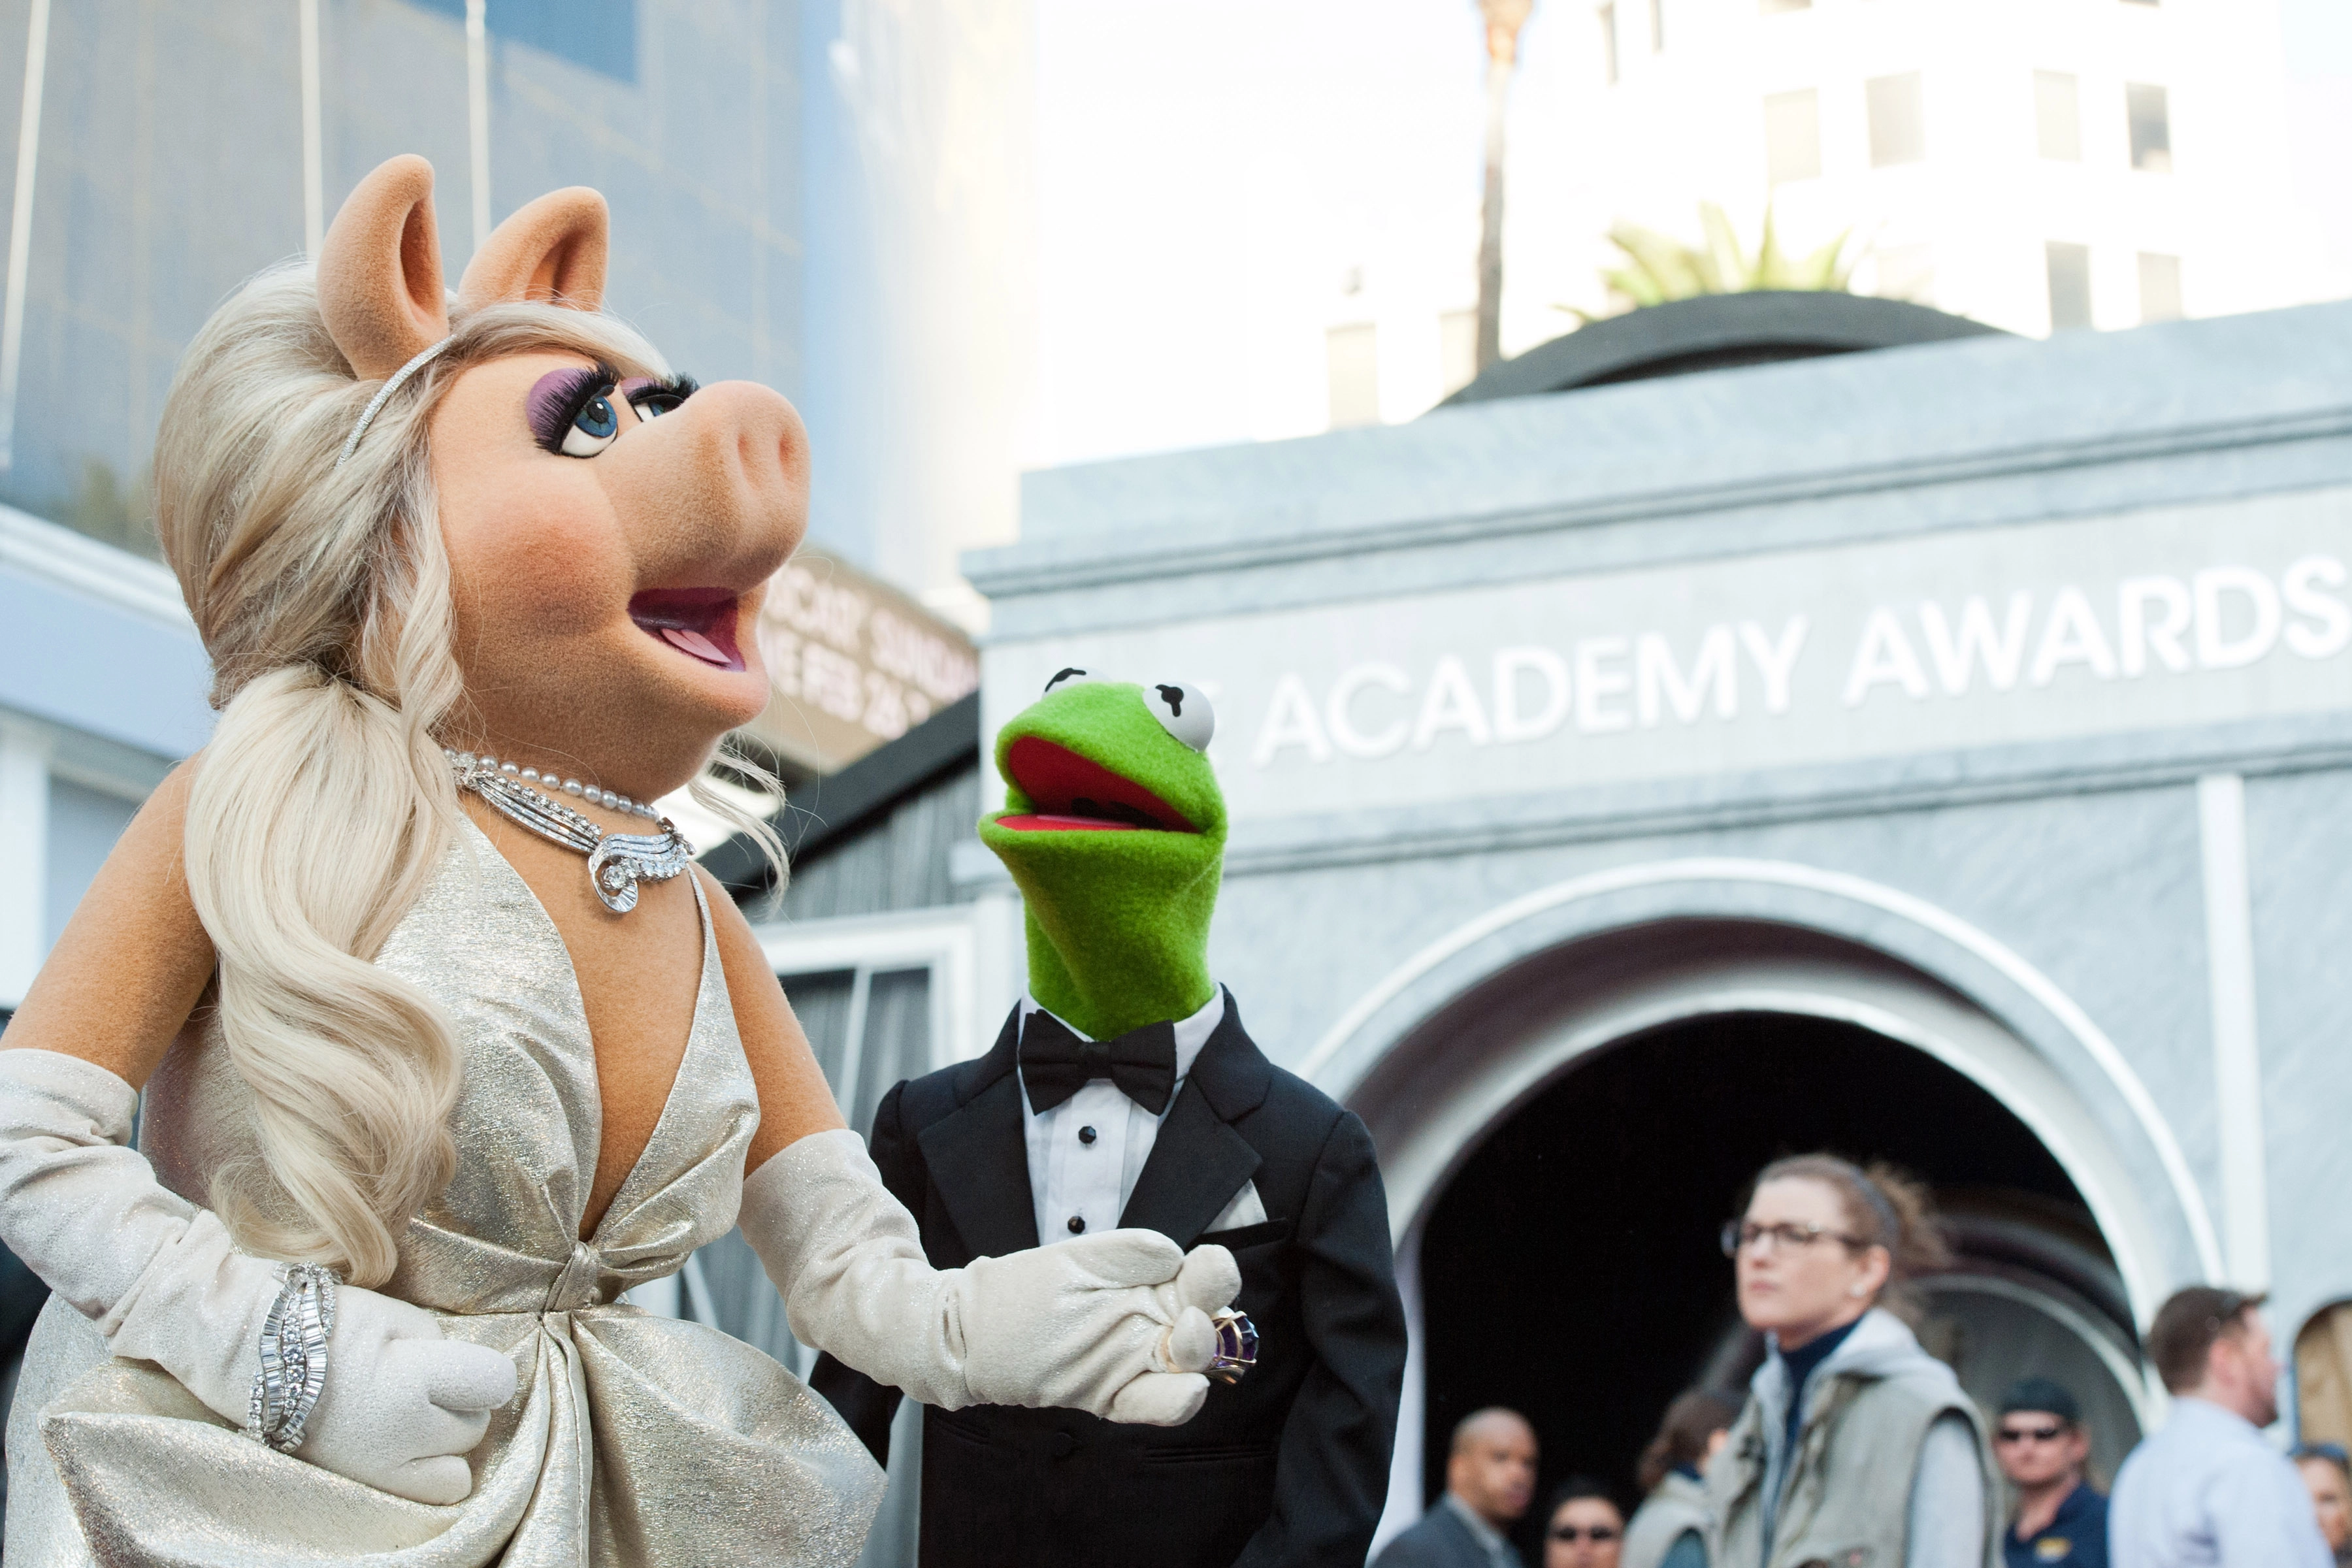 Movie The Muppets HD Wallpaper | Background Image